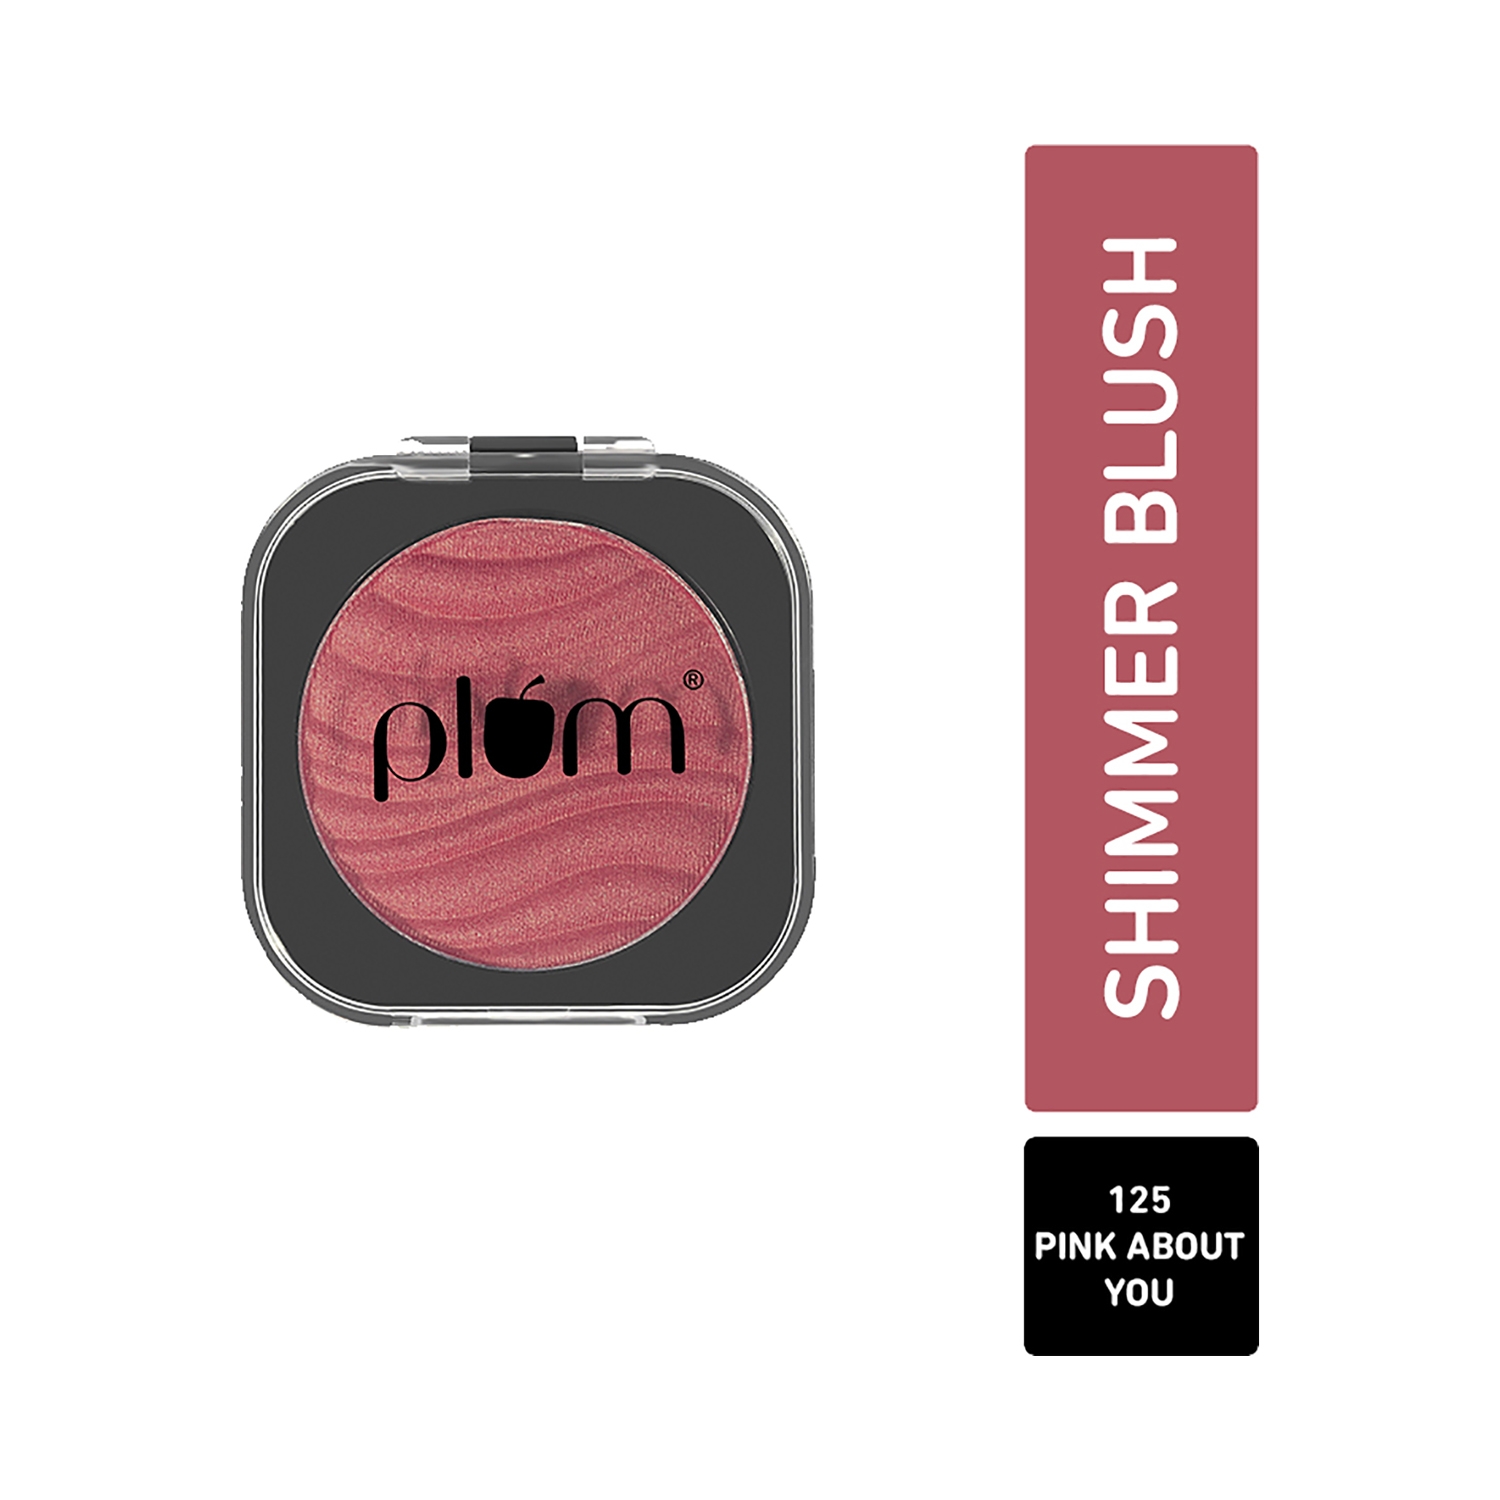 Plum | Plum Cheek-A-Boo Shimmer Blush with Highly Pigmented - 125 Pink About You (4.5g)